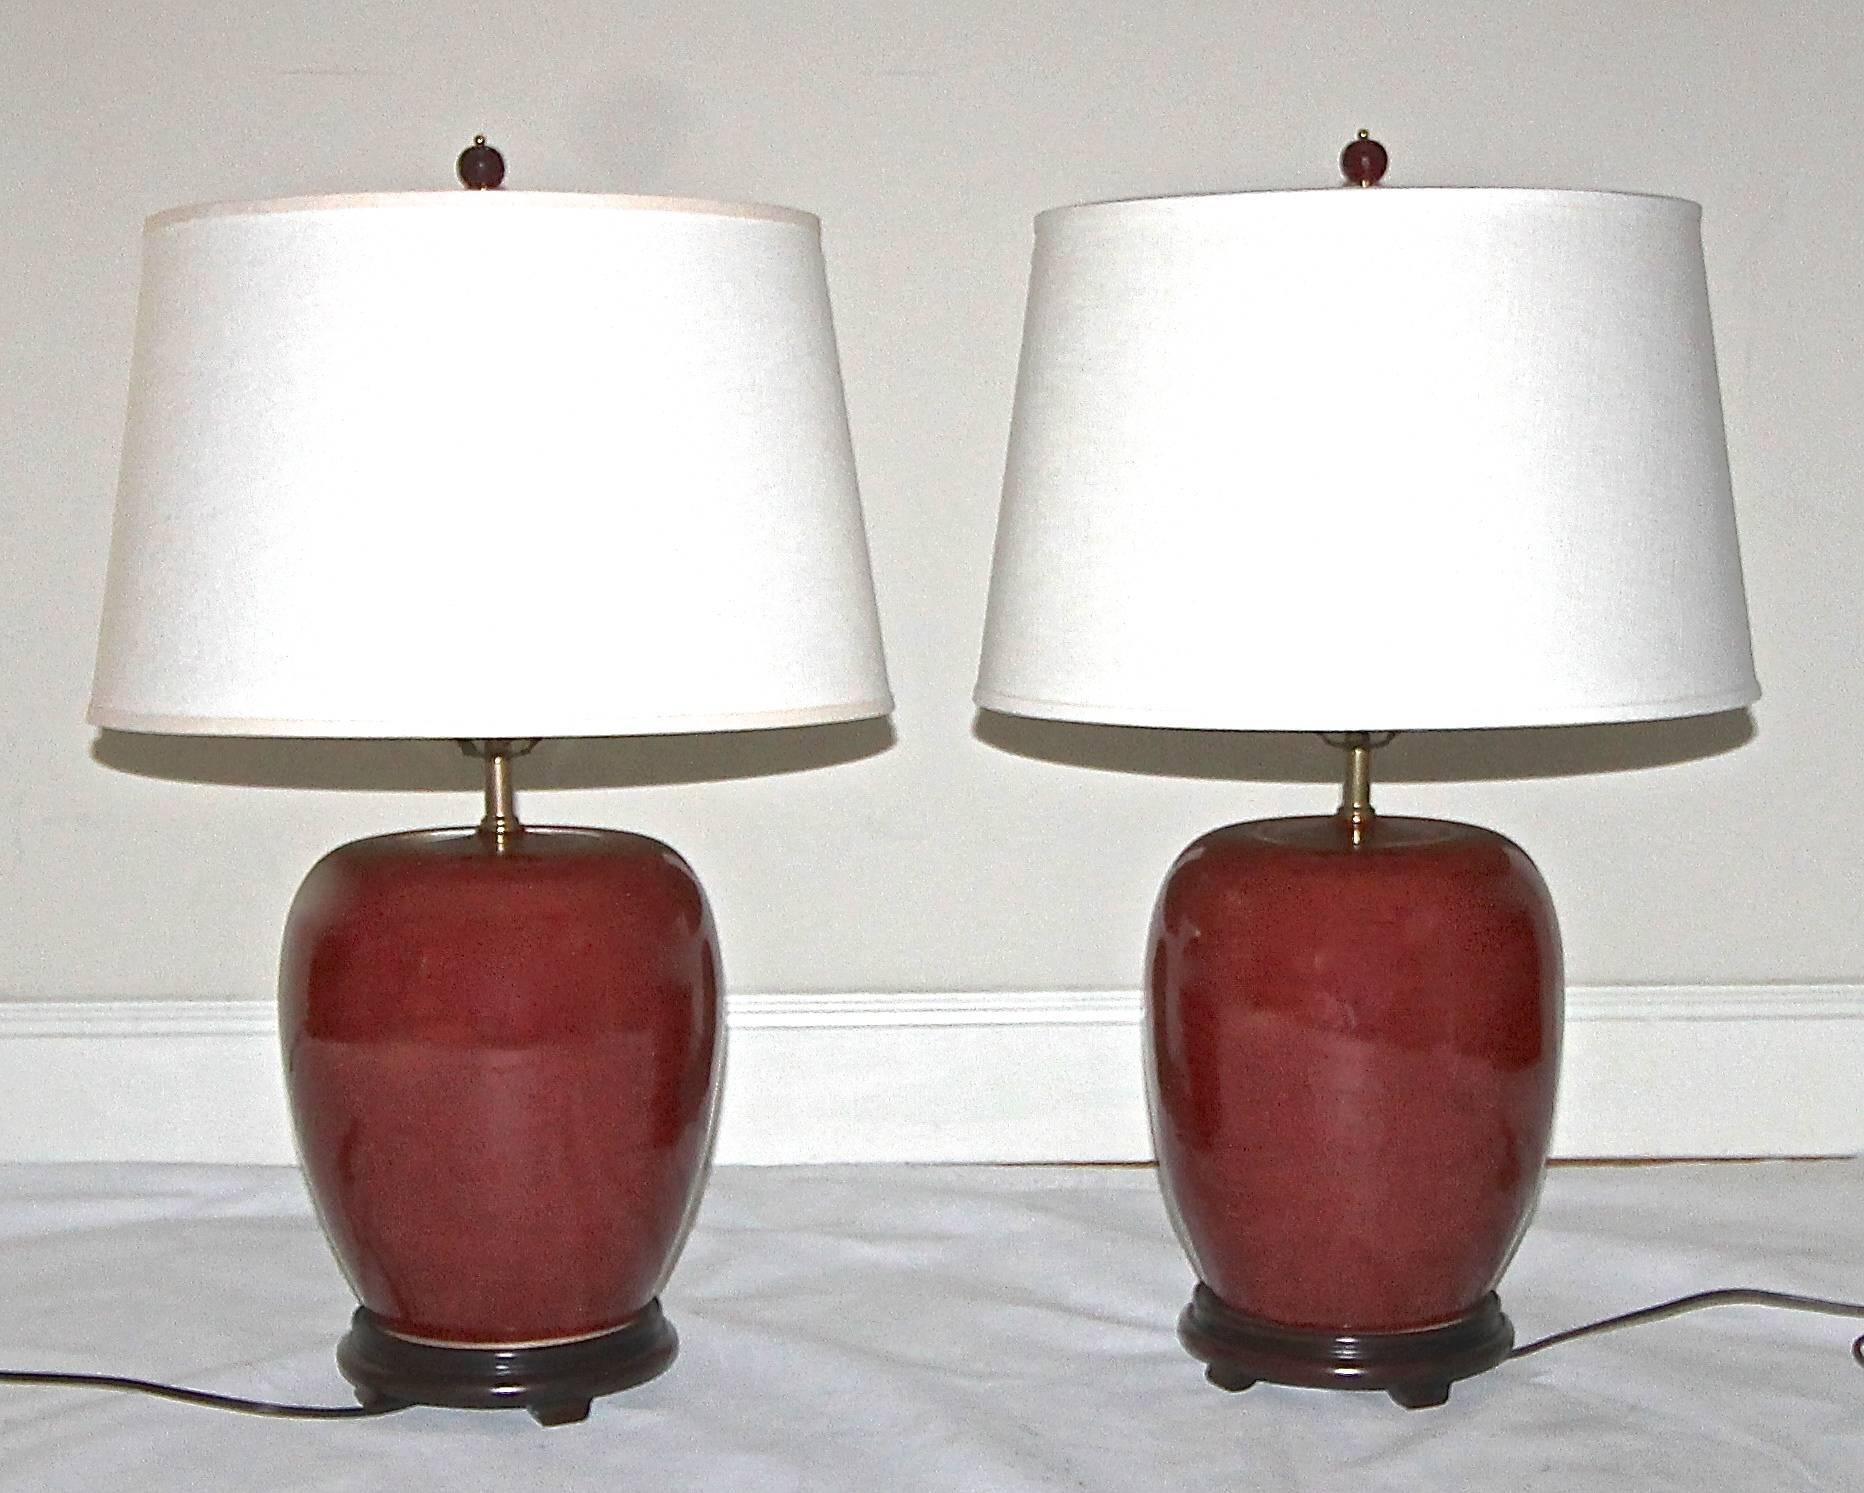 20th Century Pair of Chinese Oxblood Porcelain Lamps